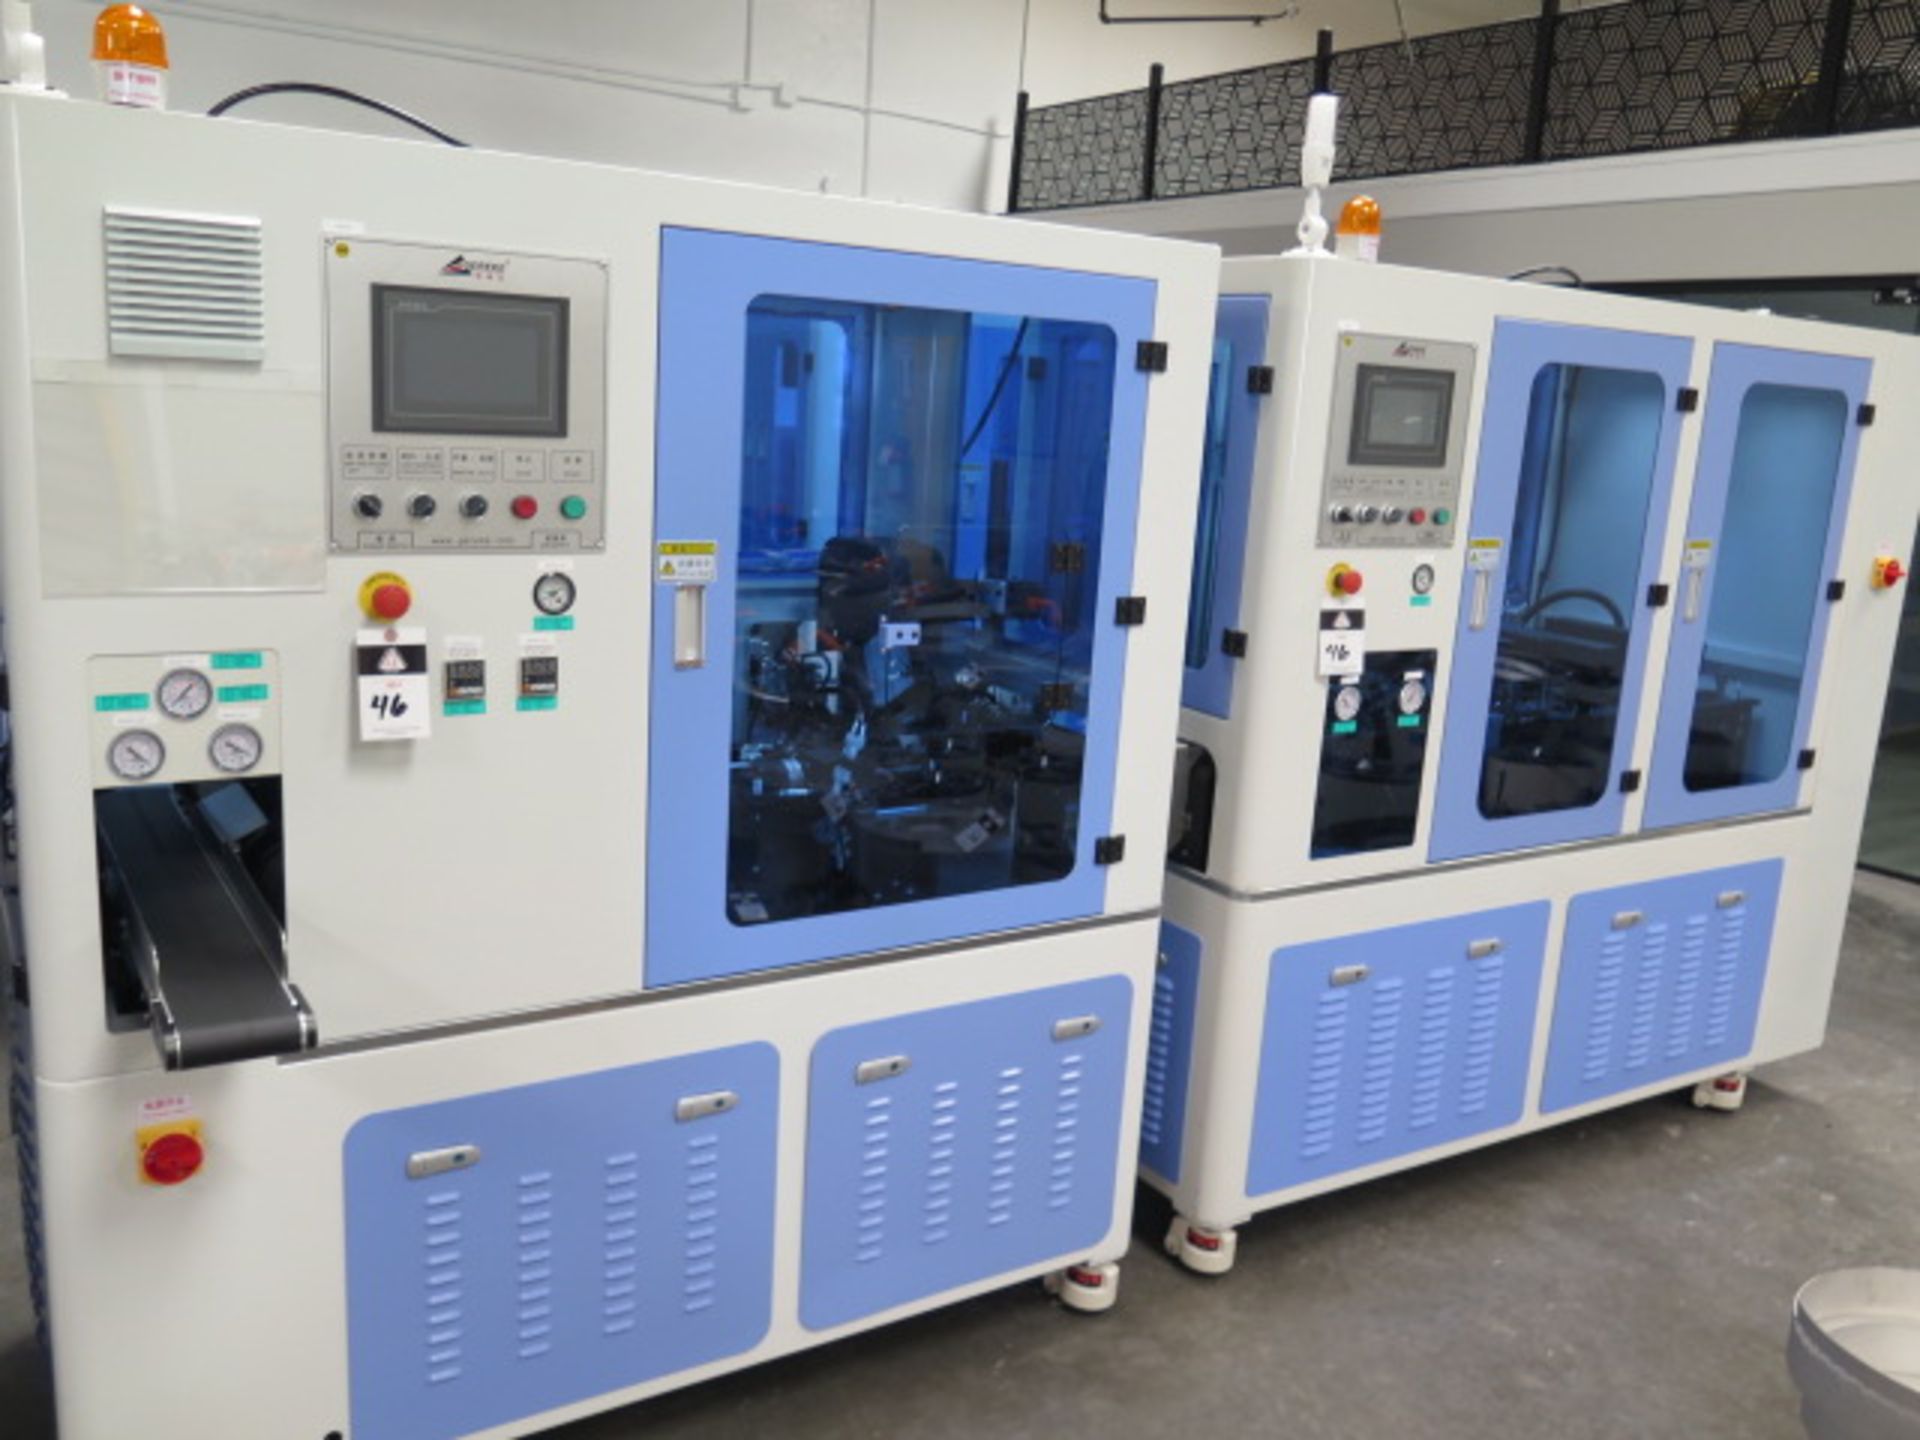 3/2021 Gereke mdl. GRK-TWO1 Cassette Assembly and Packaging Line s/n GRK20210305080, SOLD AS IS